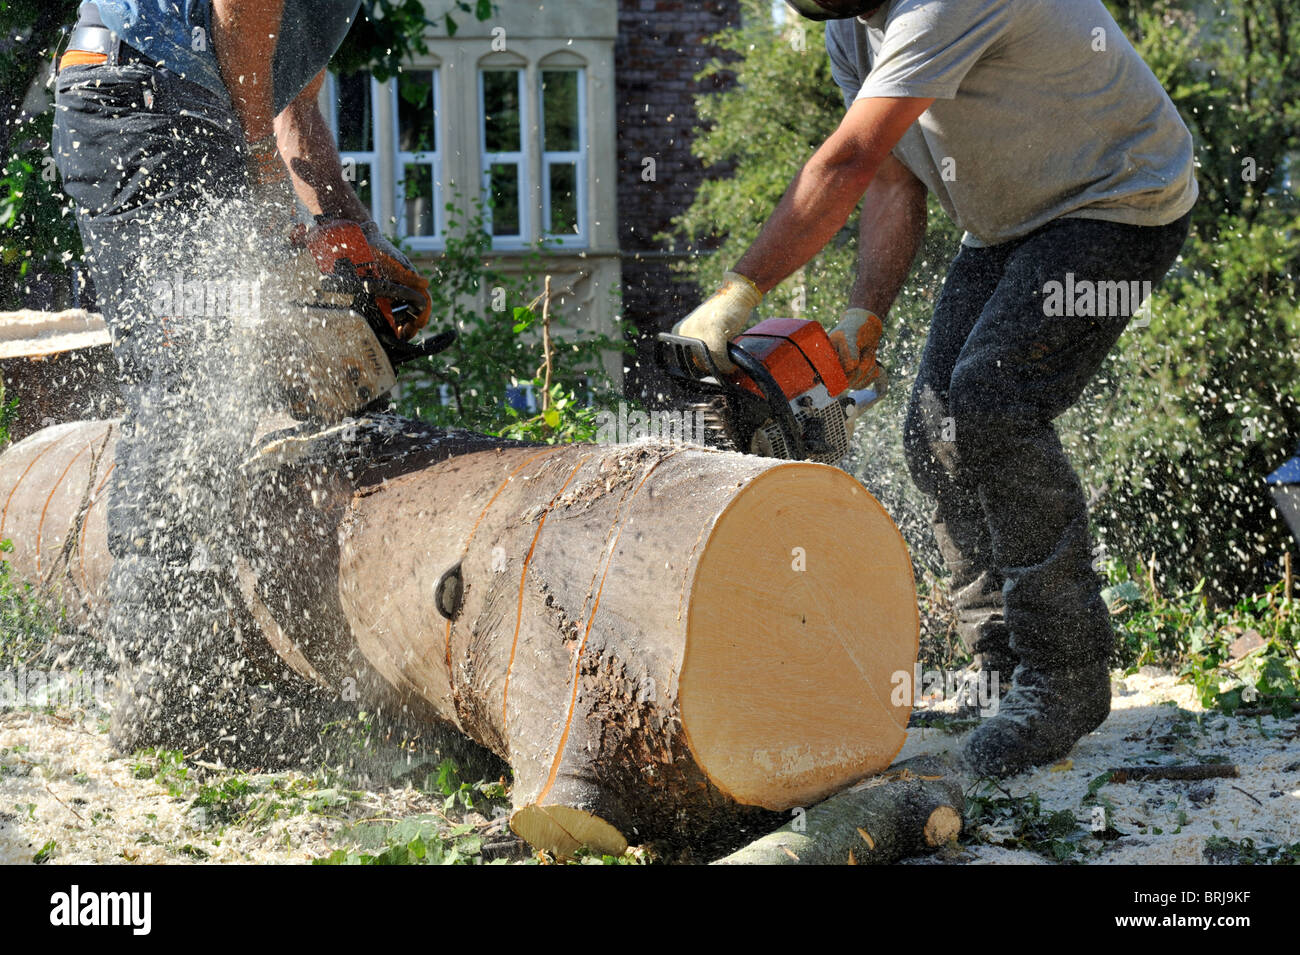 Two 'Tree surgeons' with chainsaws and safety equipment cutting newly felled tree into logs Stock Photo